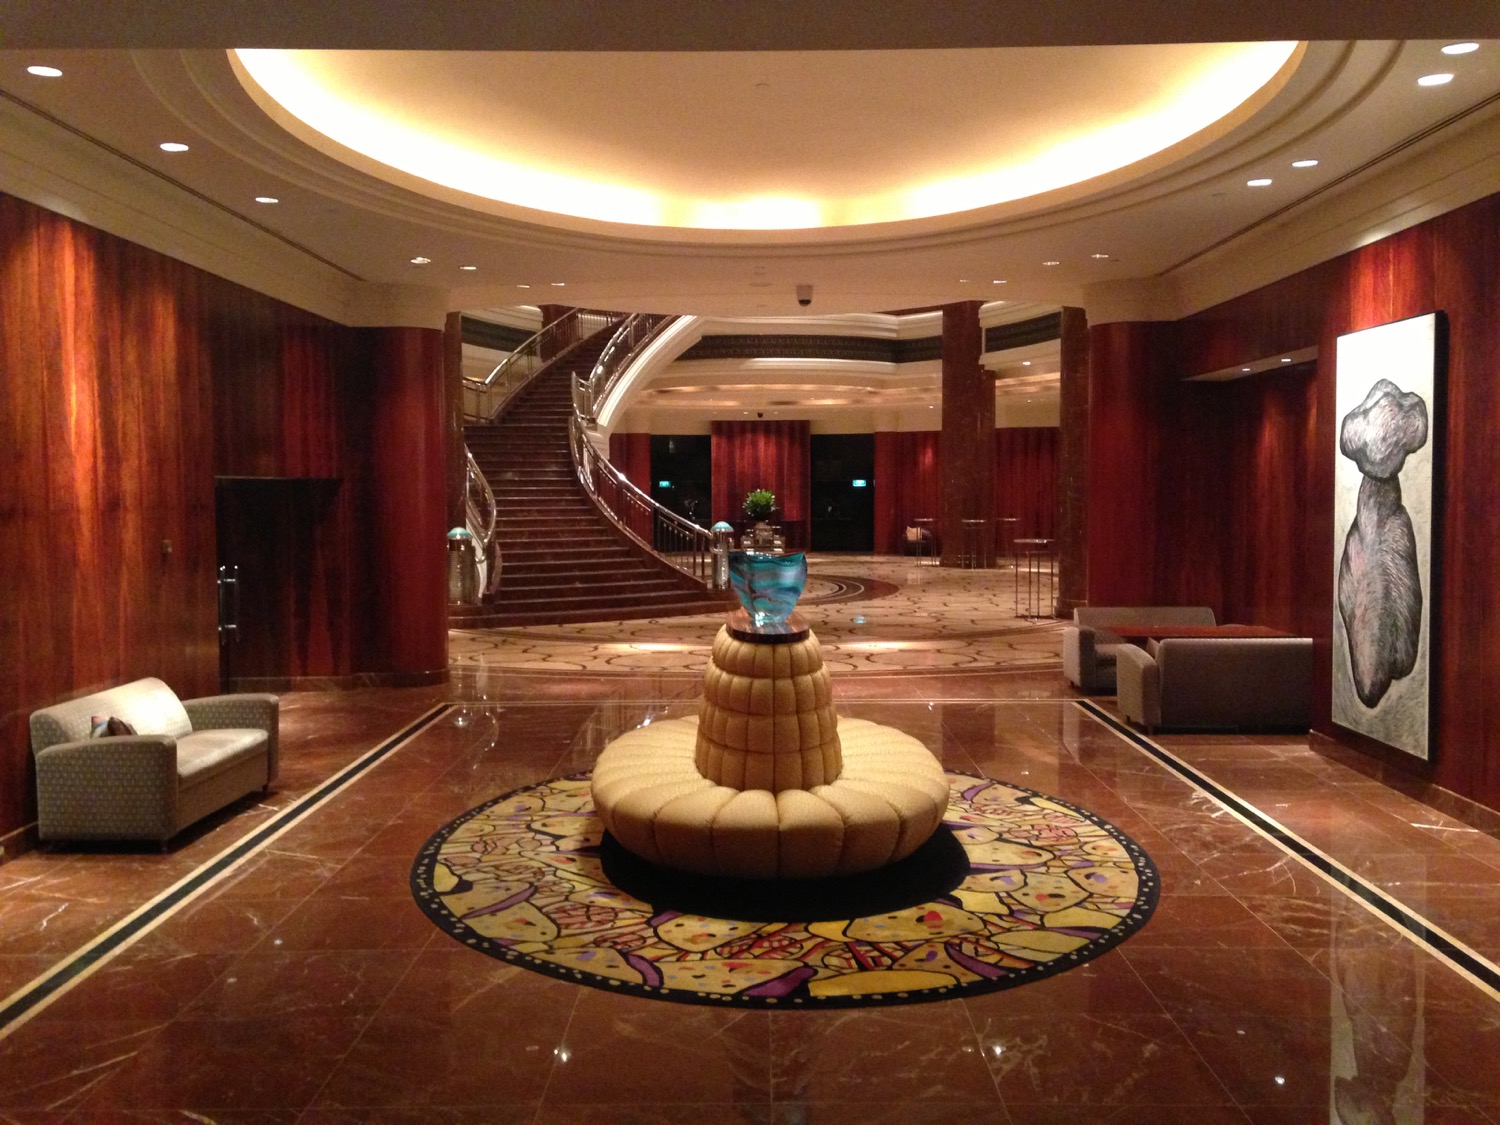 a large lobby with a circular staircase and a large vase on a round rug